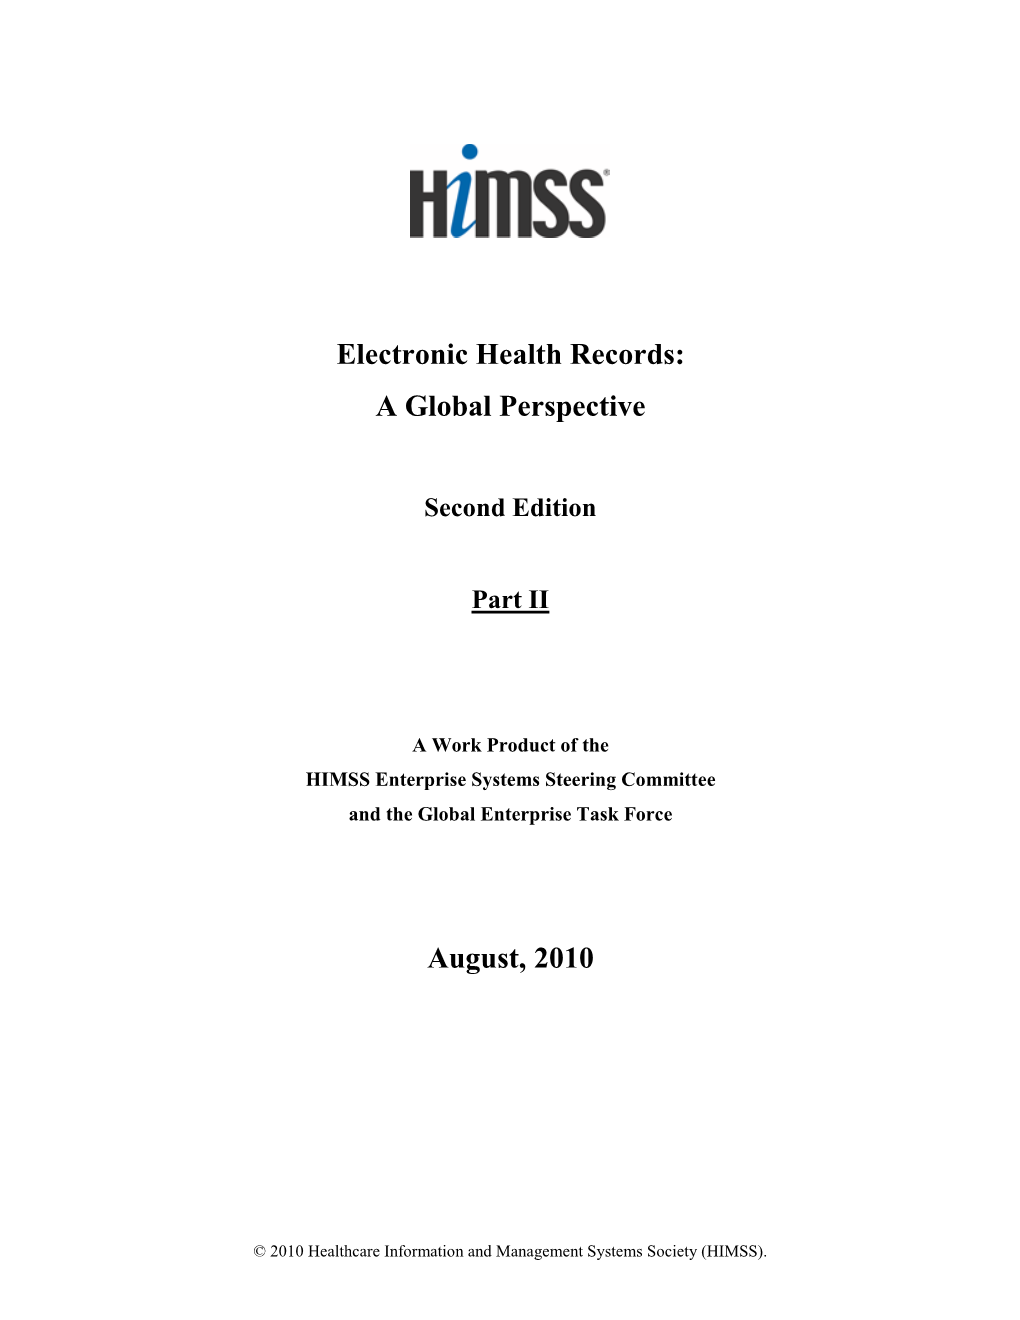 Electronic Health Records: a Global Perspective August, 2010